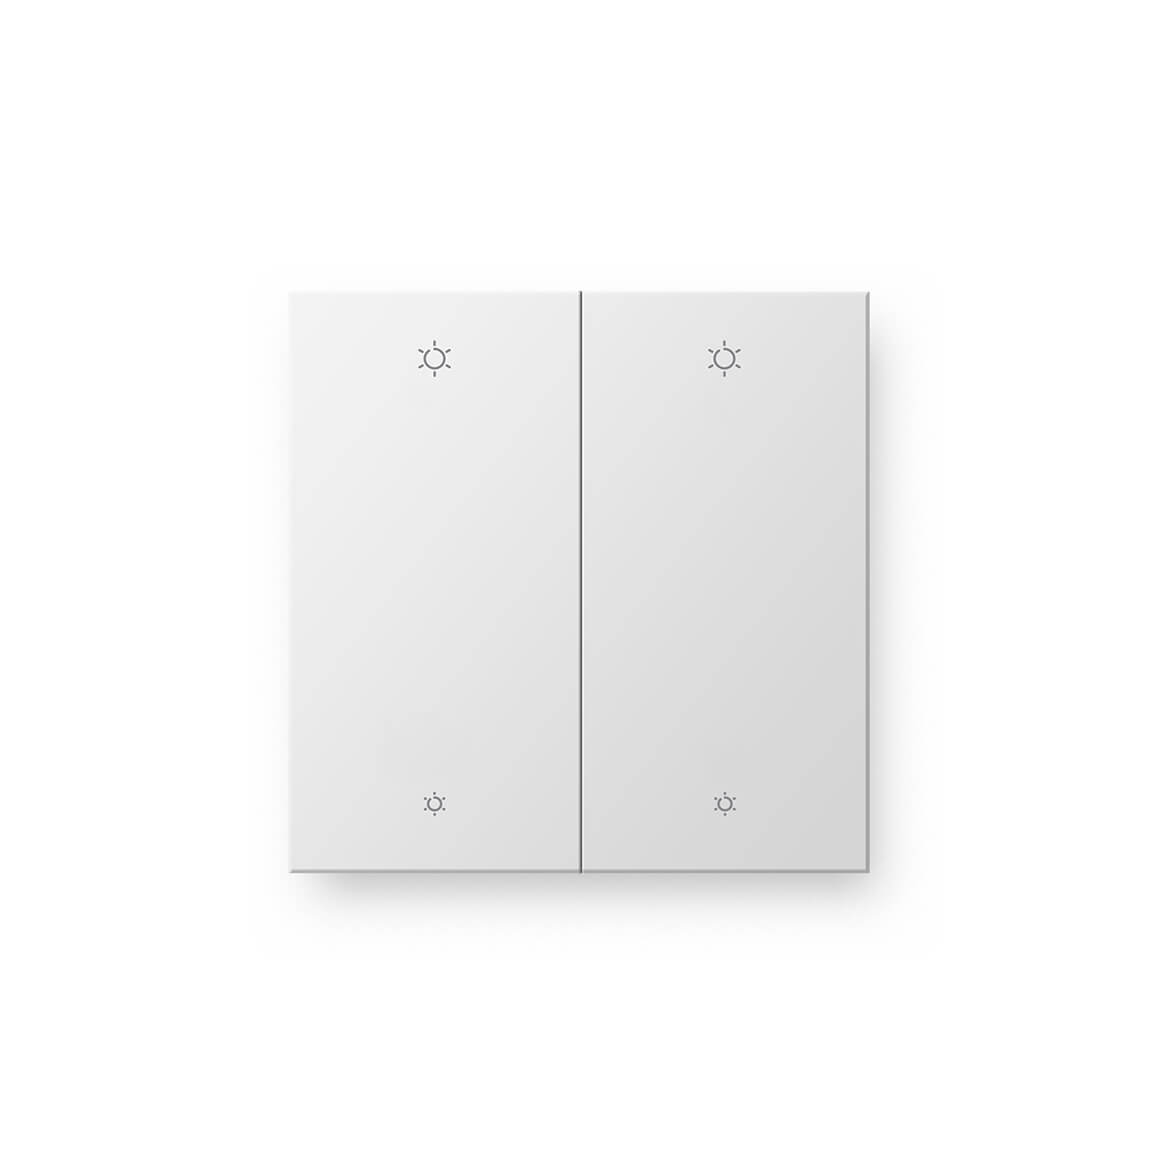 UK Dimmer Switch